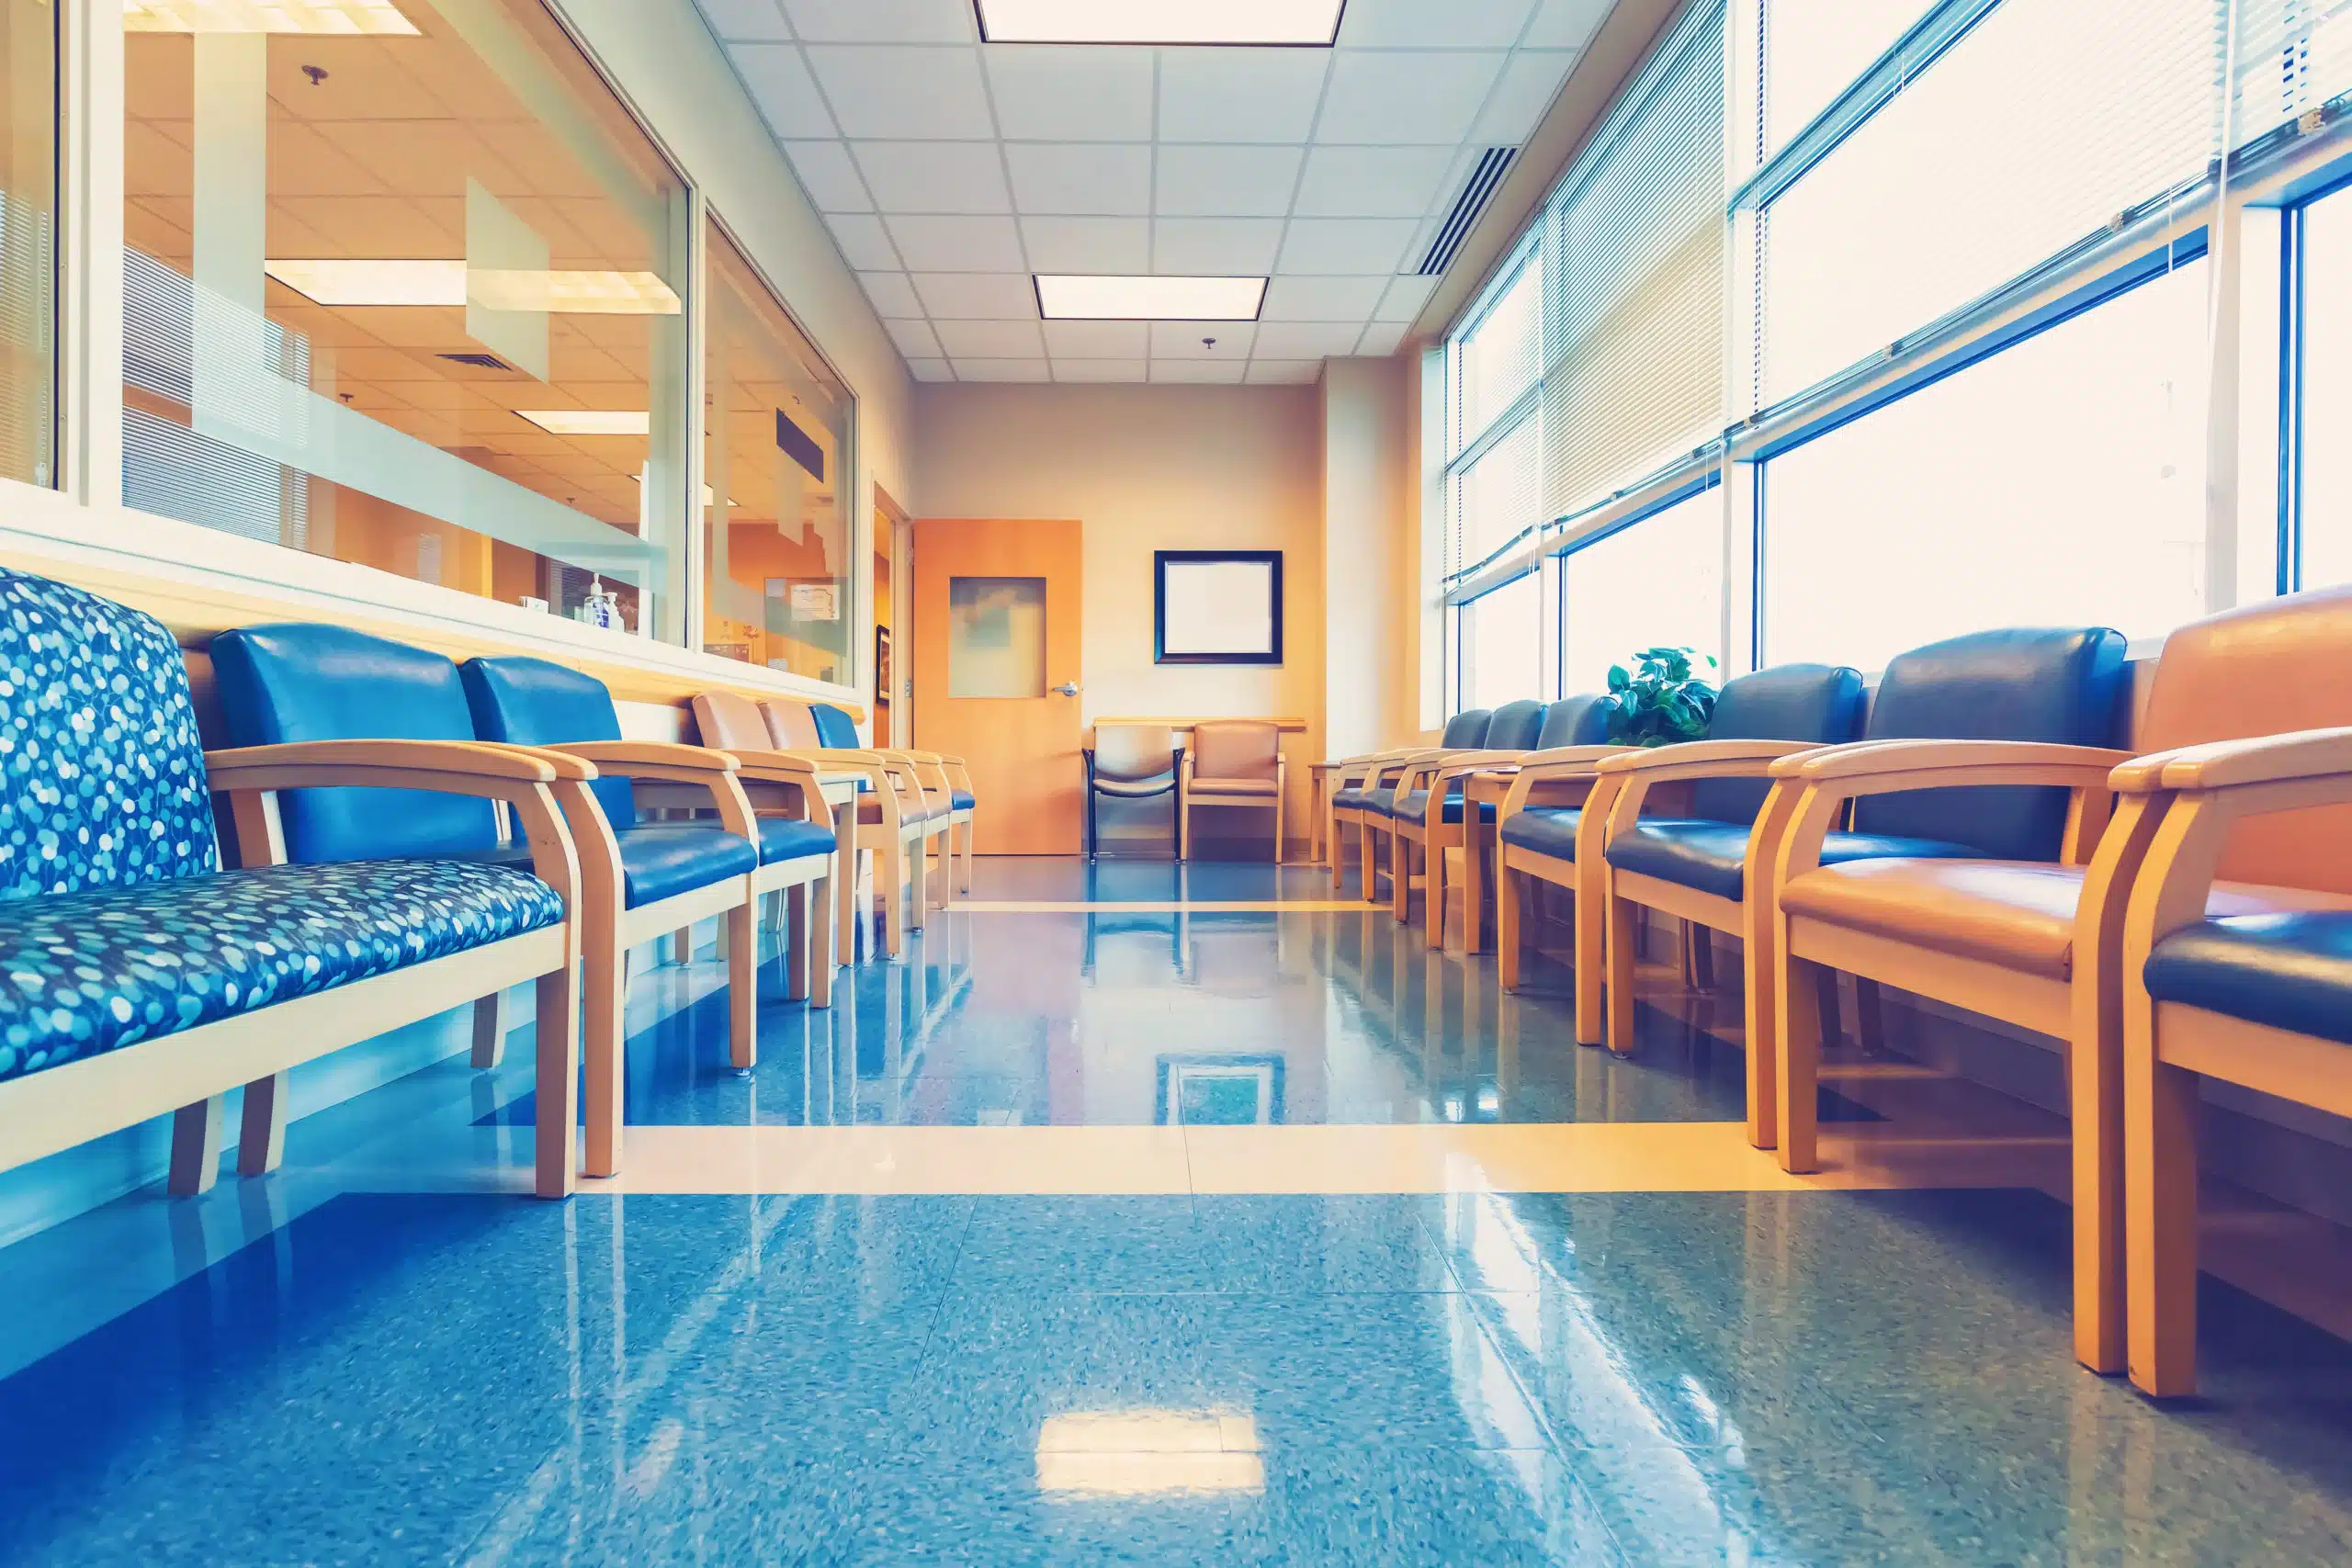 Image of an empty waiting room for a hospital or medical office